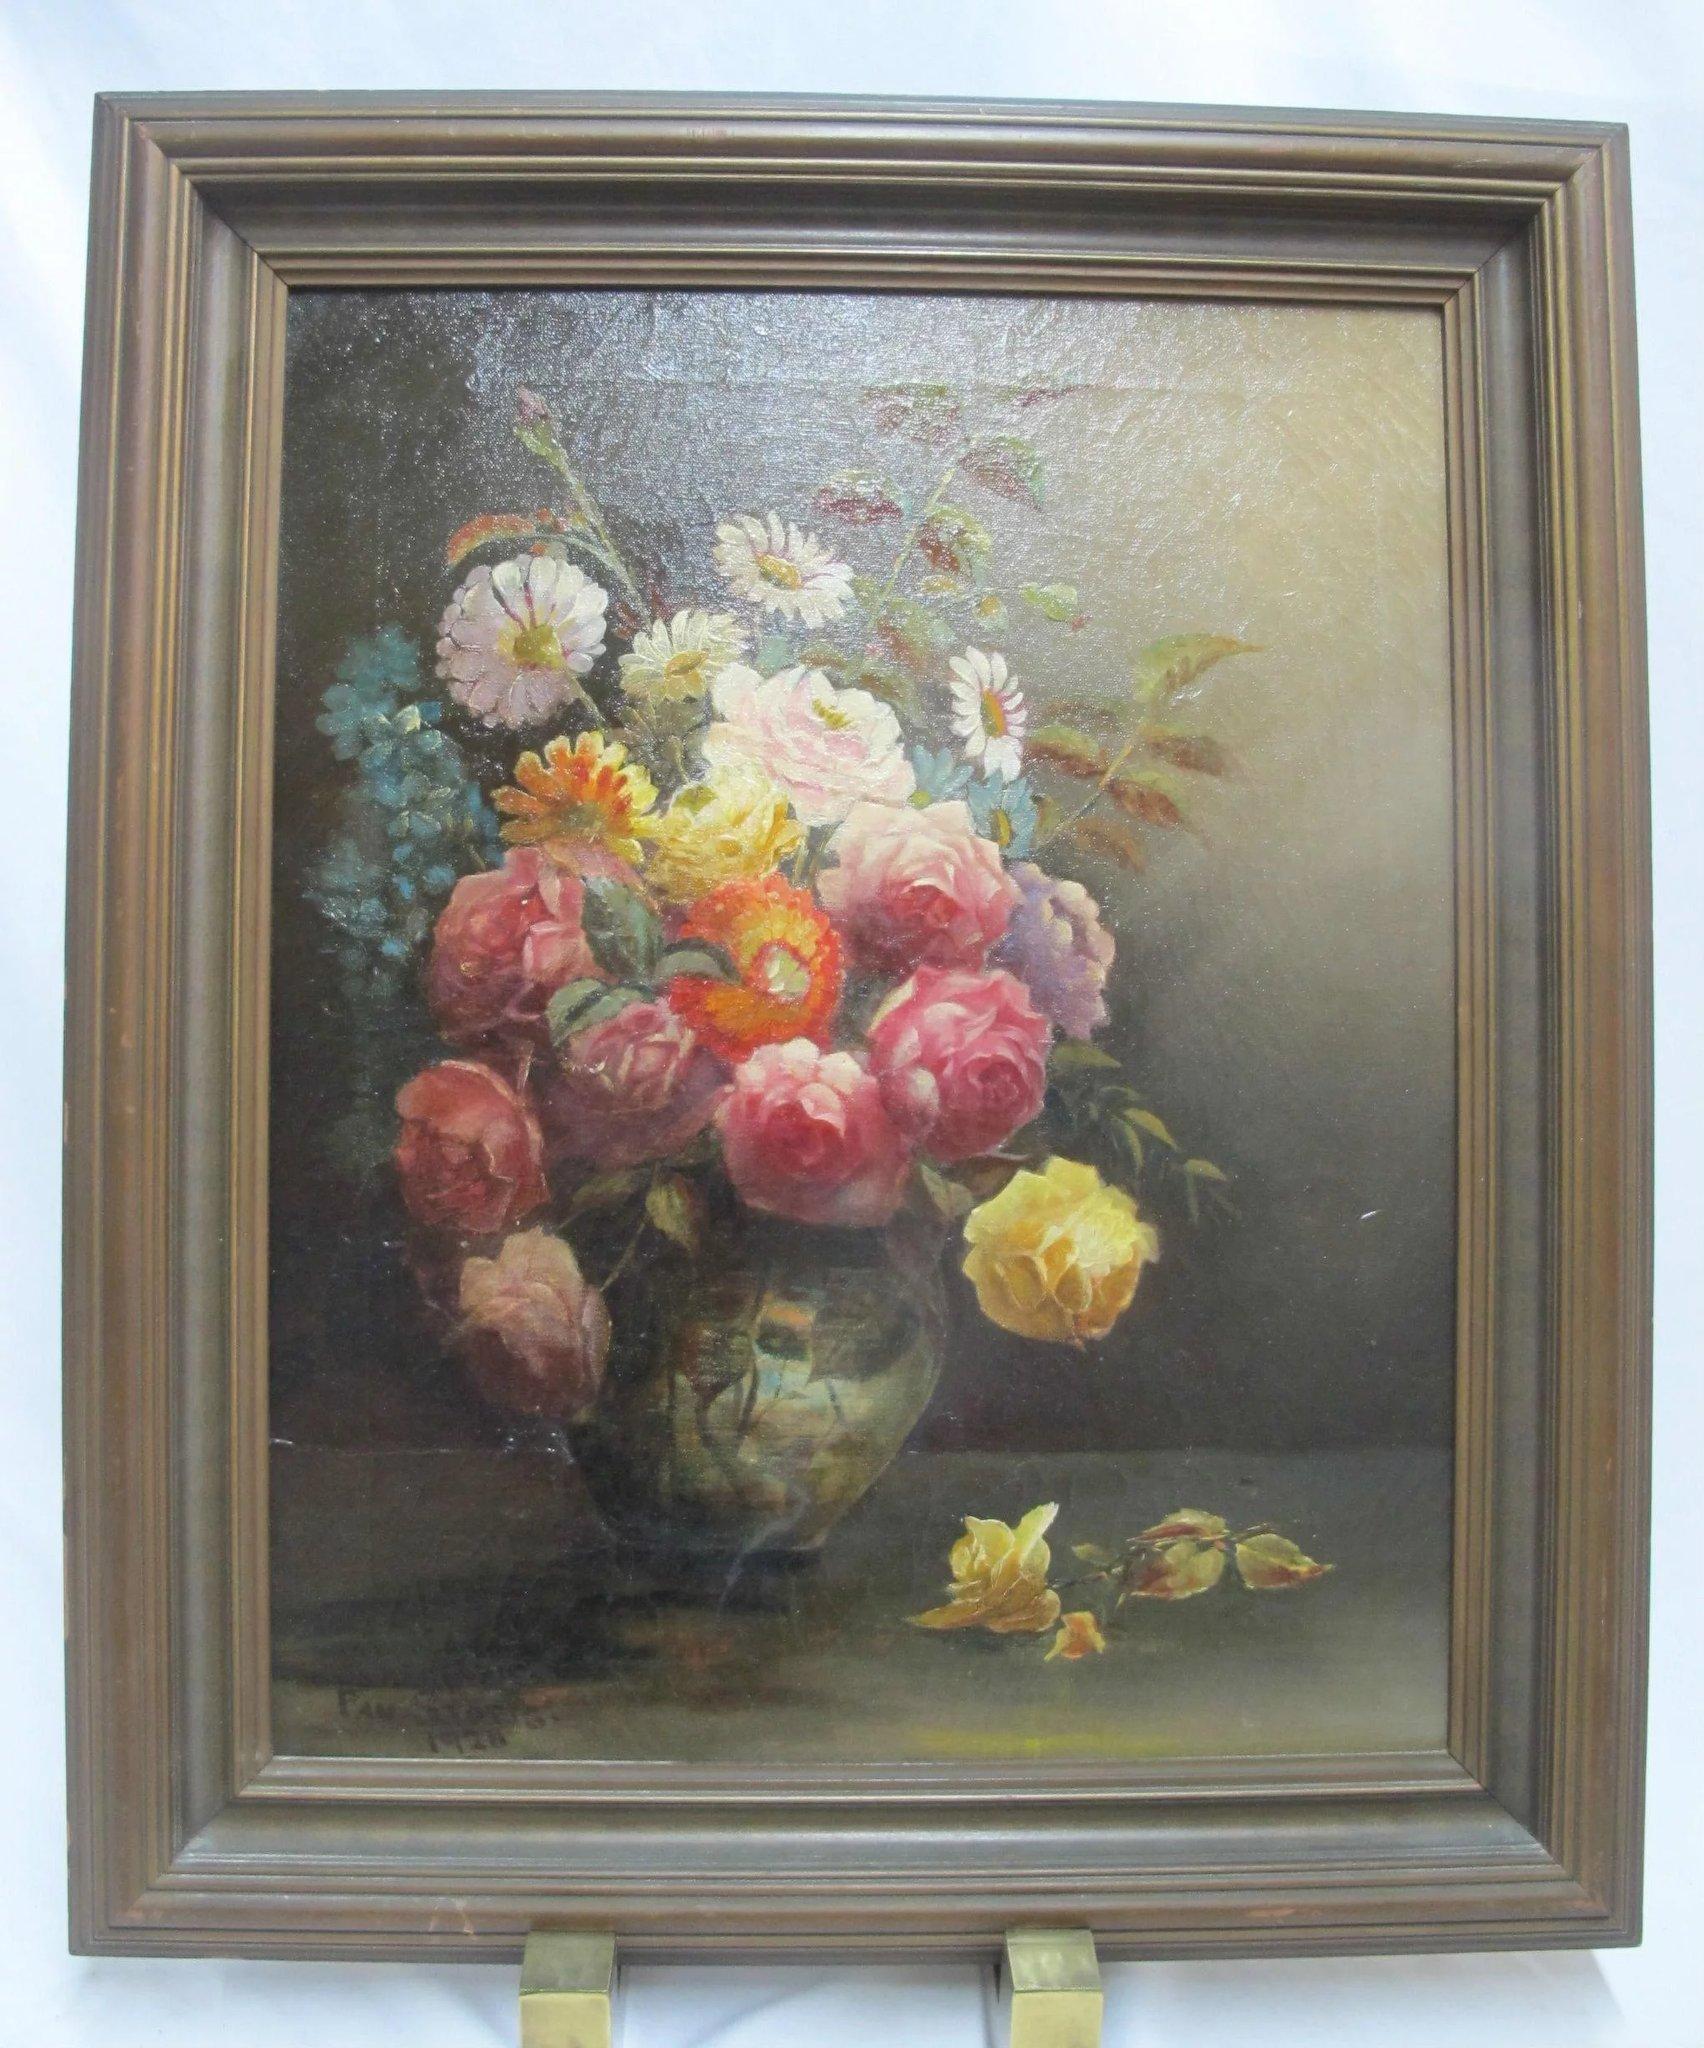 Paul M Stotts (Canada, 1872)

Original still life oil painting on canvas of flowers in a vase. Signed at lower left and dated 1928. Frame measures 28